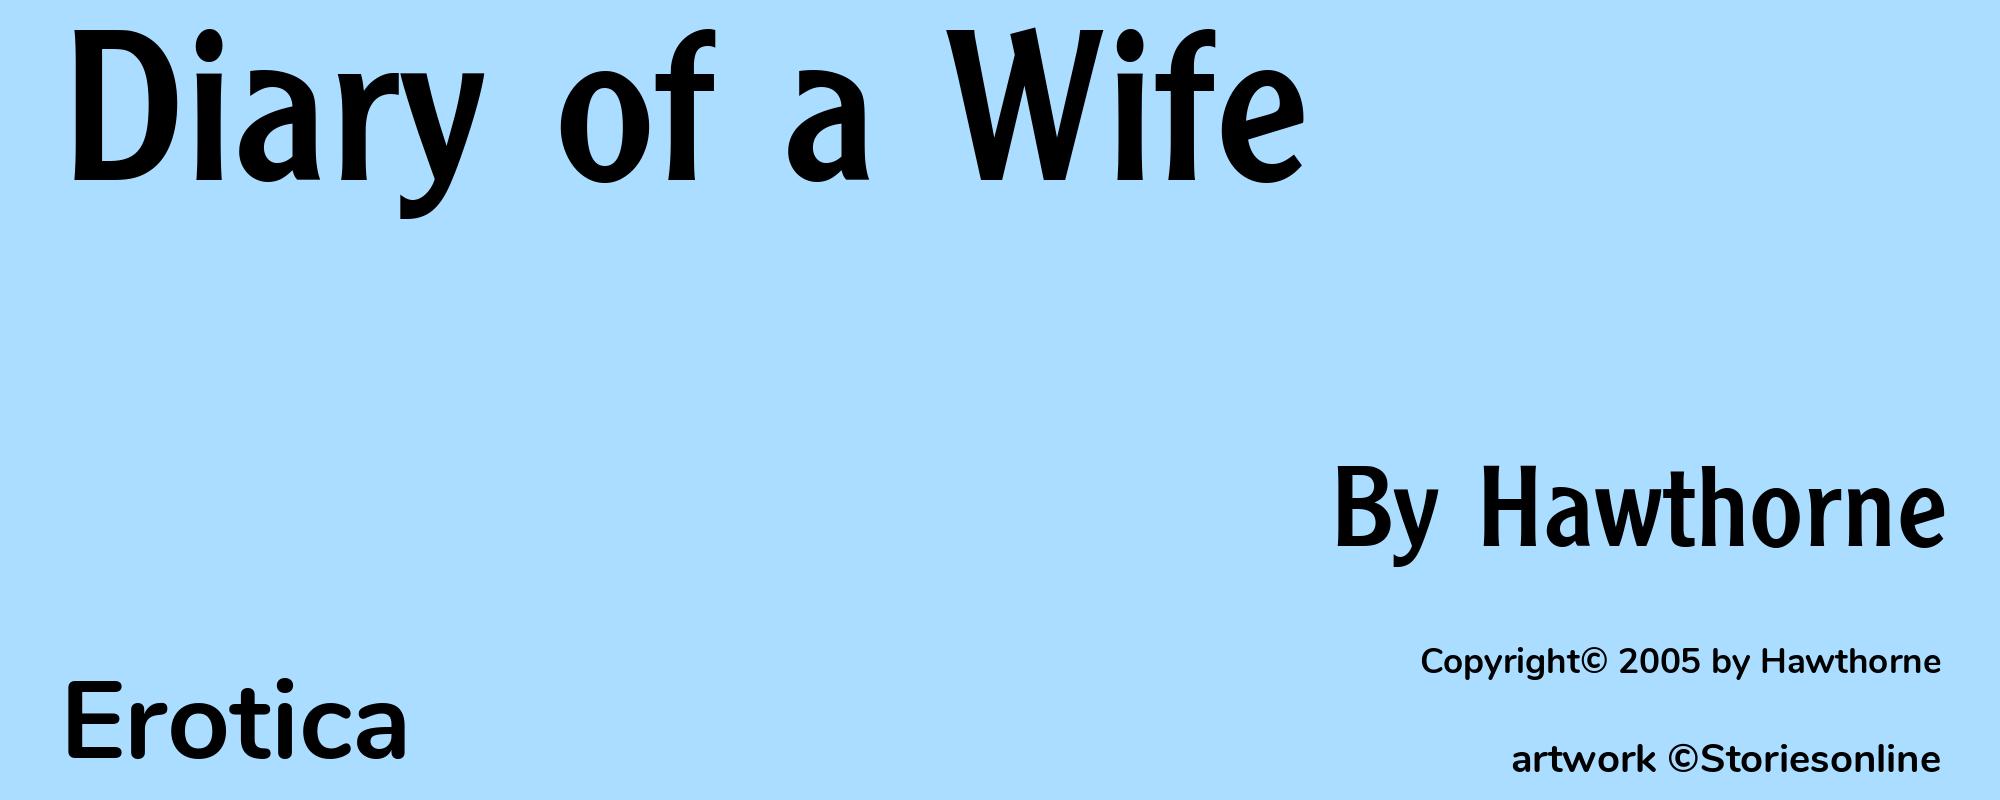 Diary of a Wife - Cover